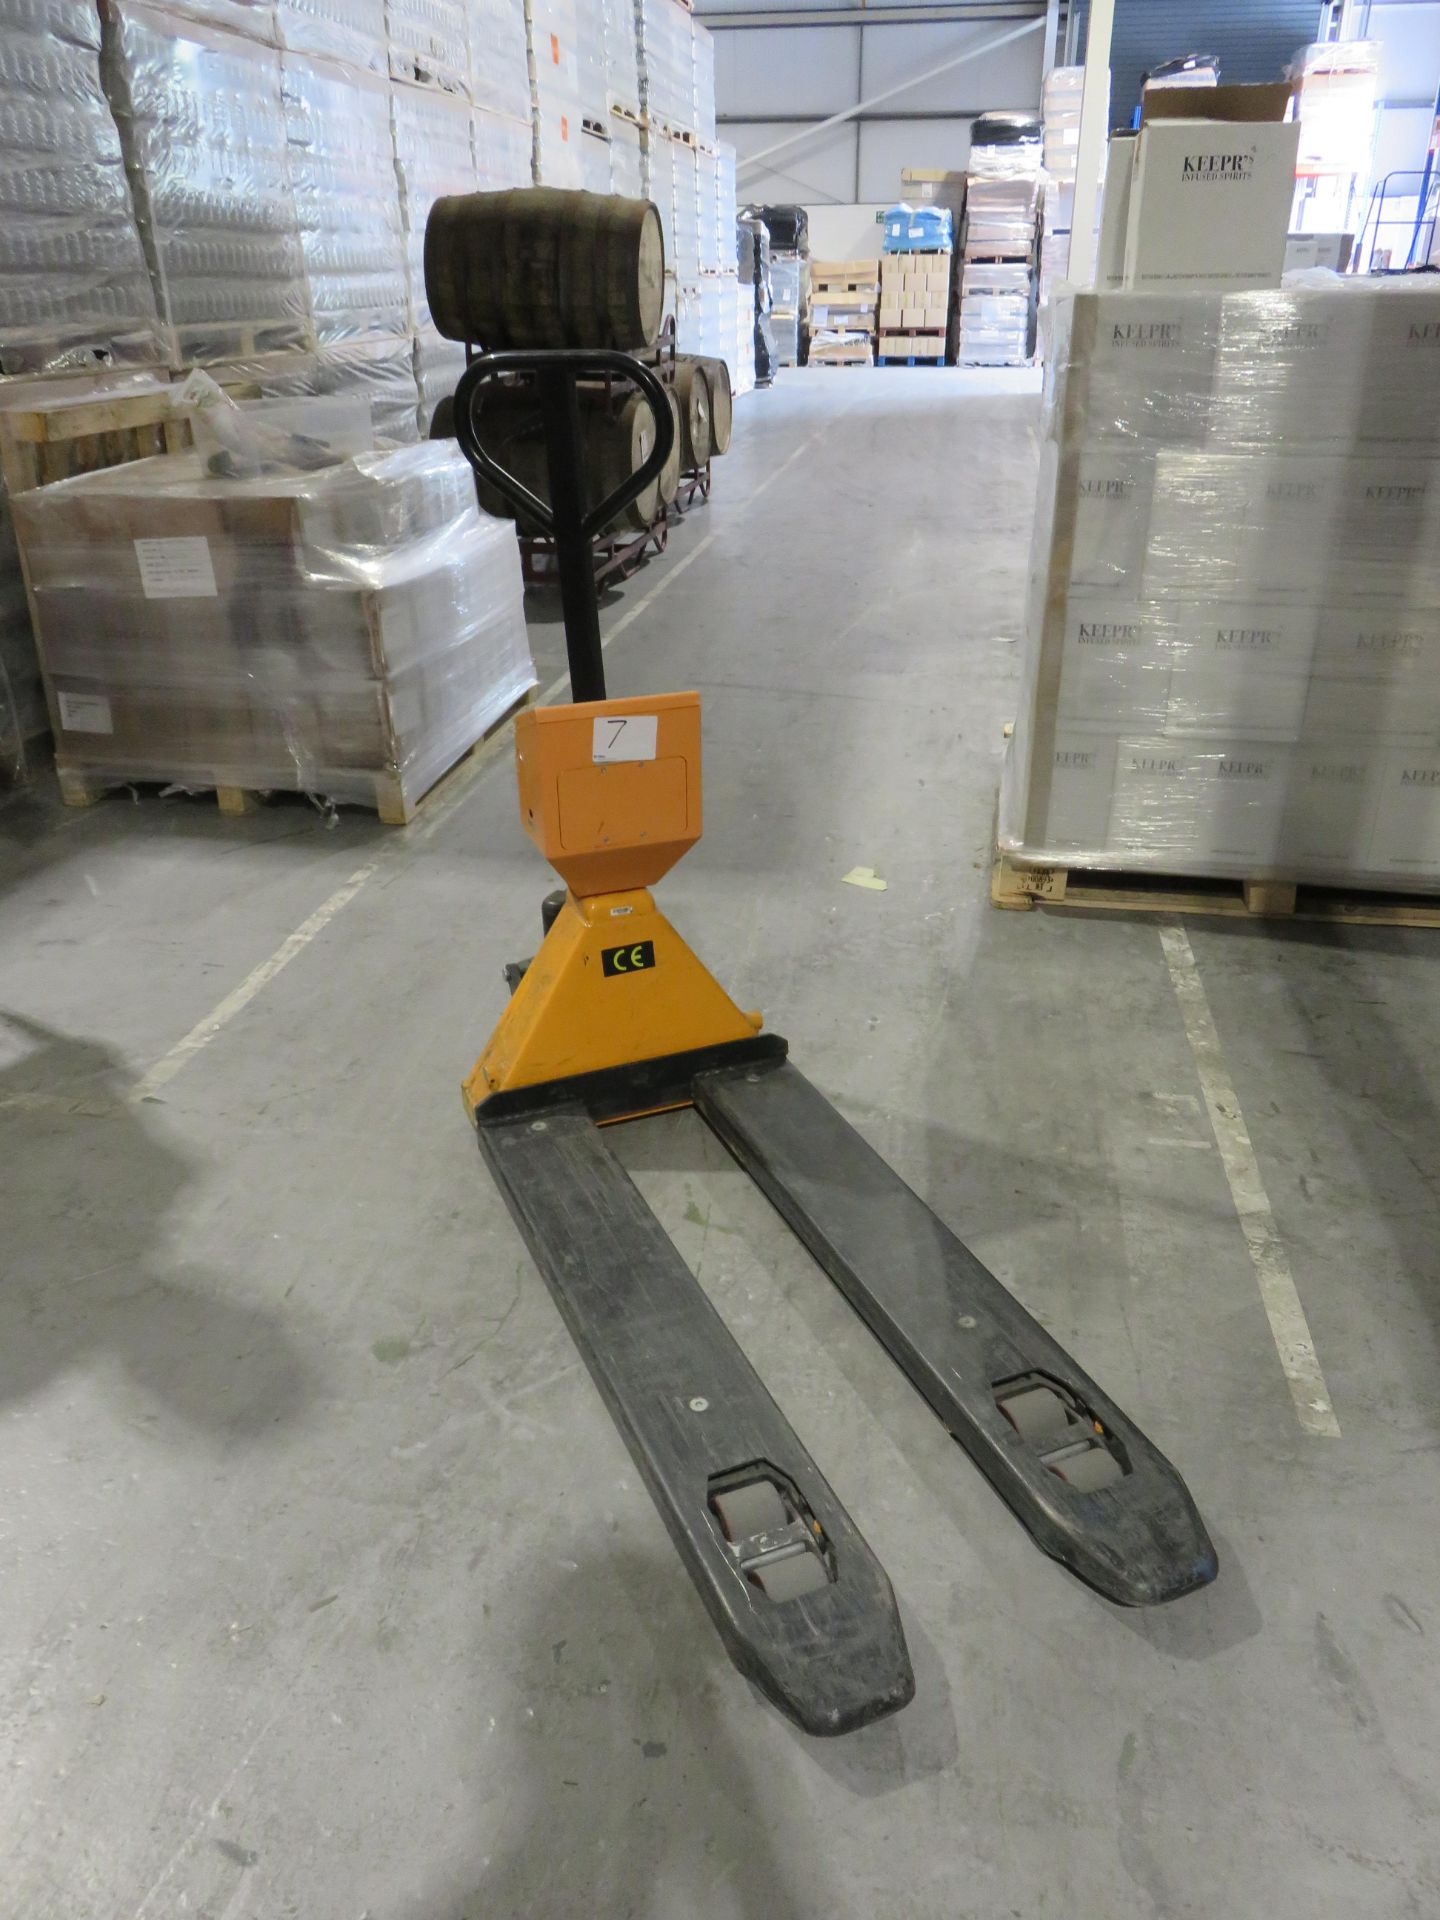 1, Unbranded Hydraulic Pallet Truck with TPS-1 Digital Scale. Serial No. 02530087027 and 2,000 kg Ca